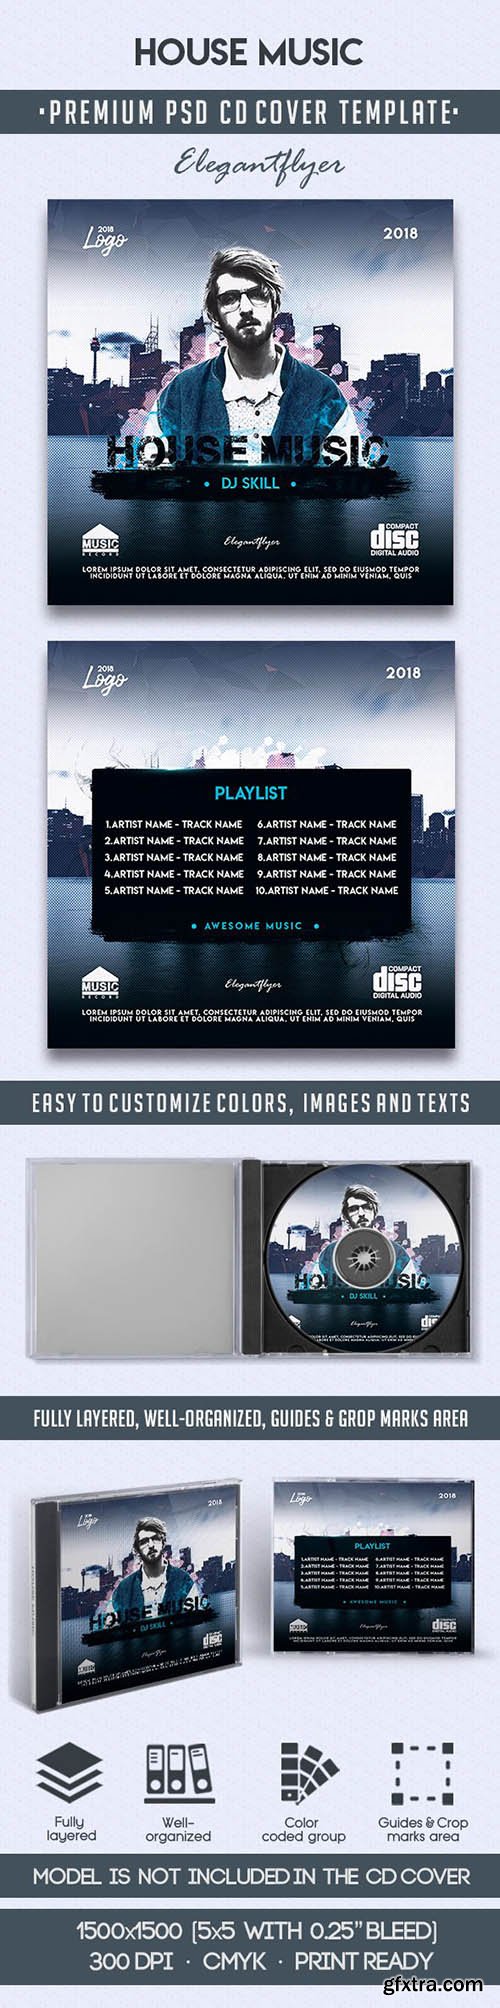 House Music – Premium CD Cover PSD Template